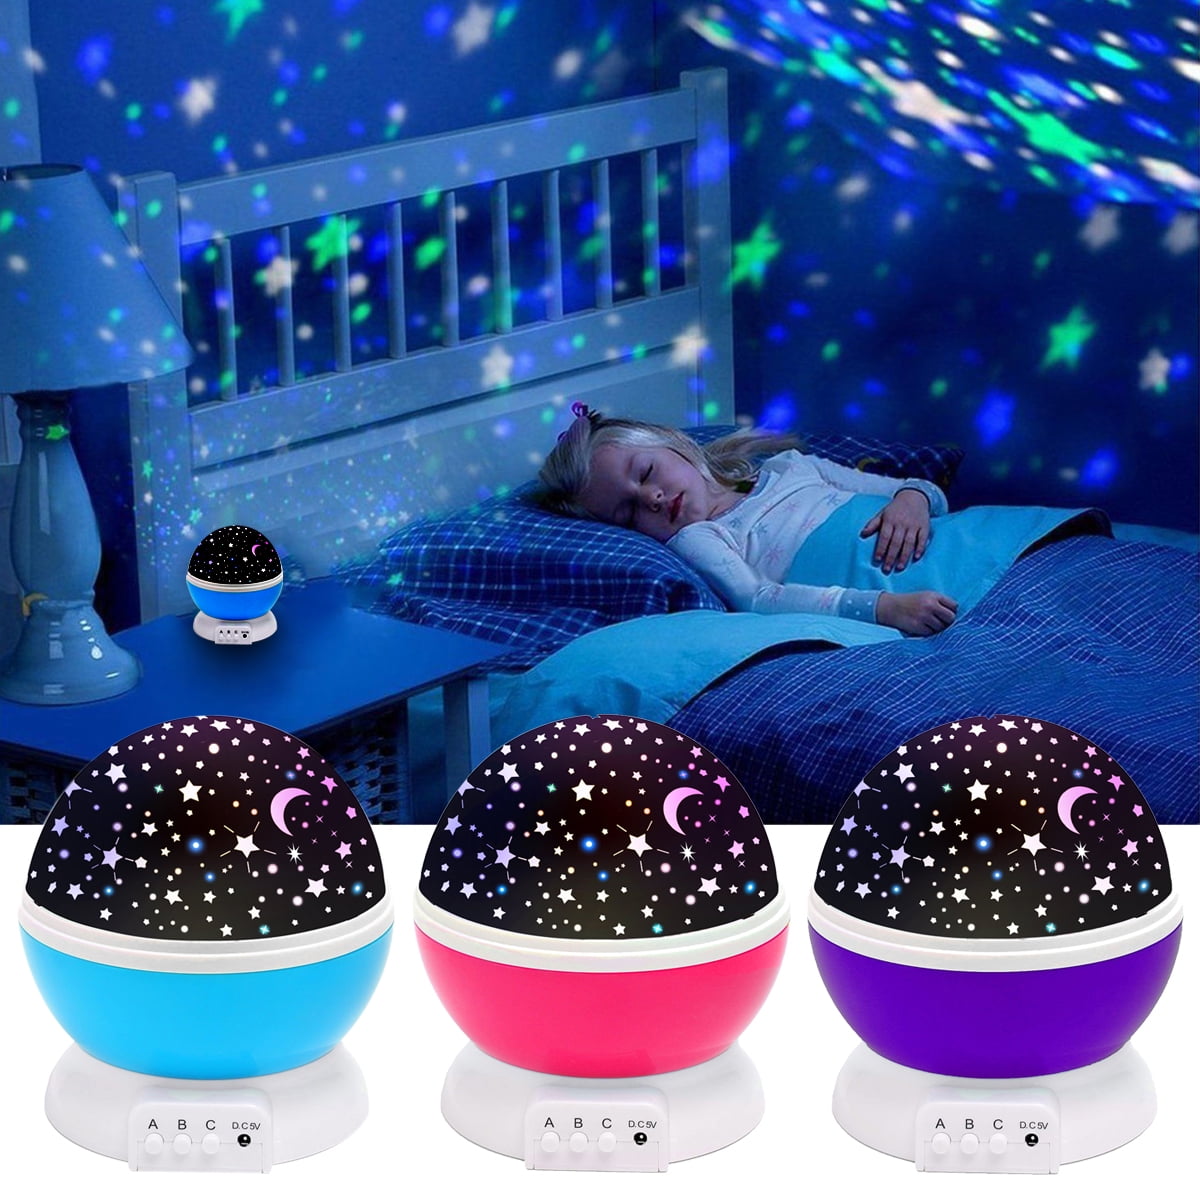 Kwanshop Star Projector Lamp Night Light 360 Degree Rotating Cosmos Star Projector, Starry Moon Sky Night Projector Kids Bedroom Desk Lamp 4 LEDs 5 Colors